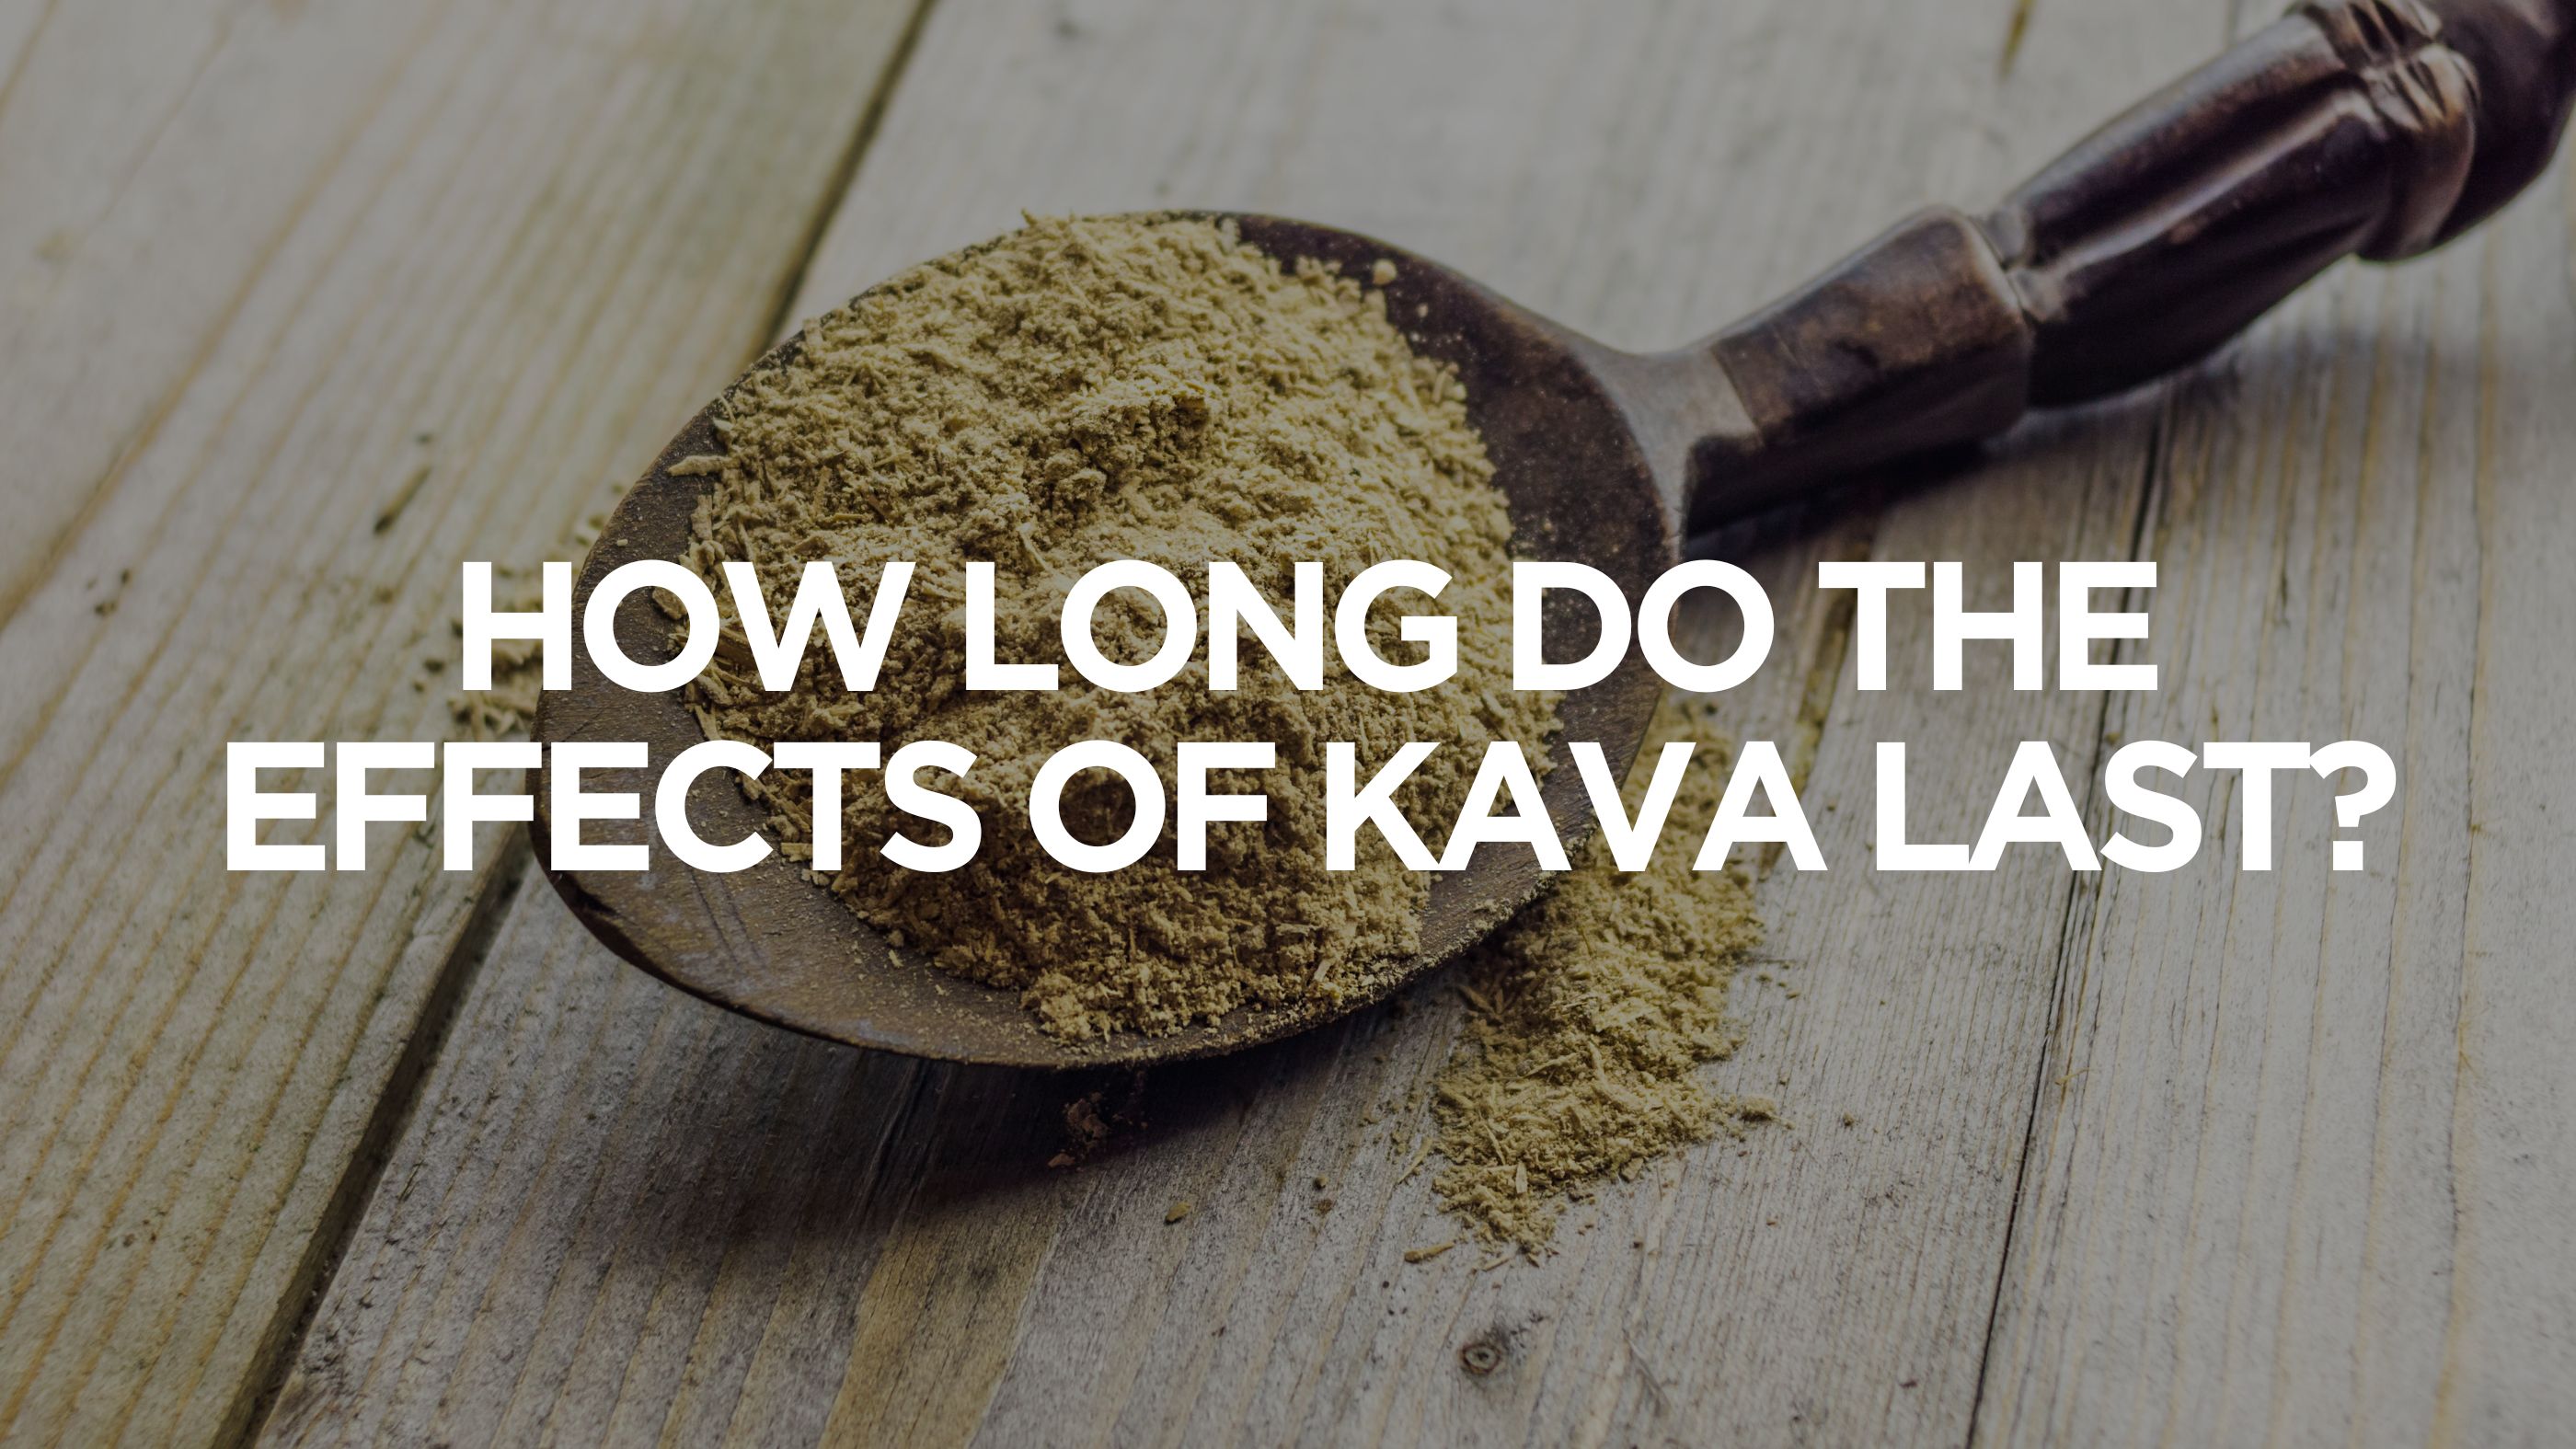 How Long Do the Effects of Kava Last?